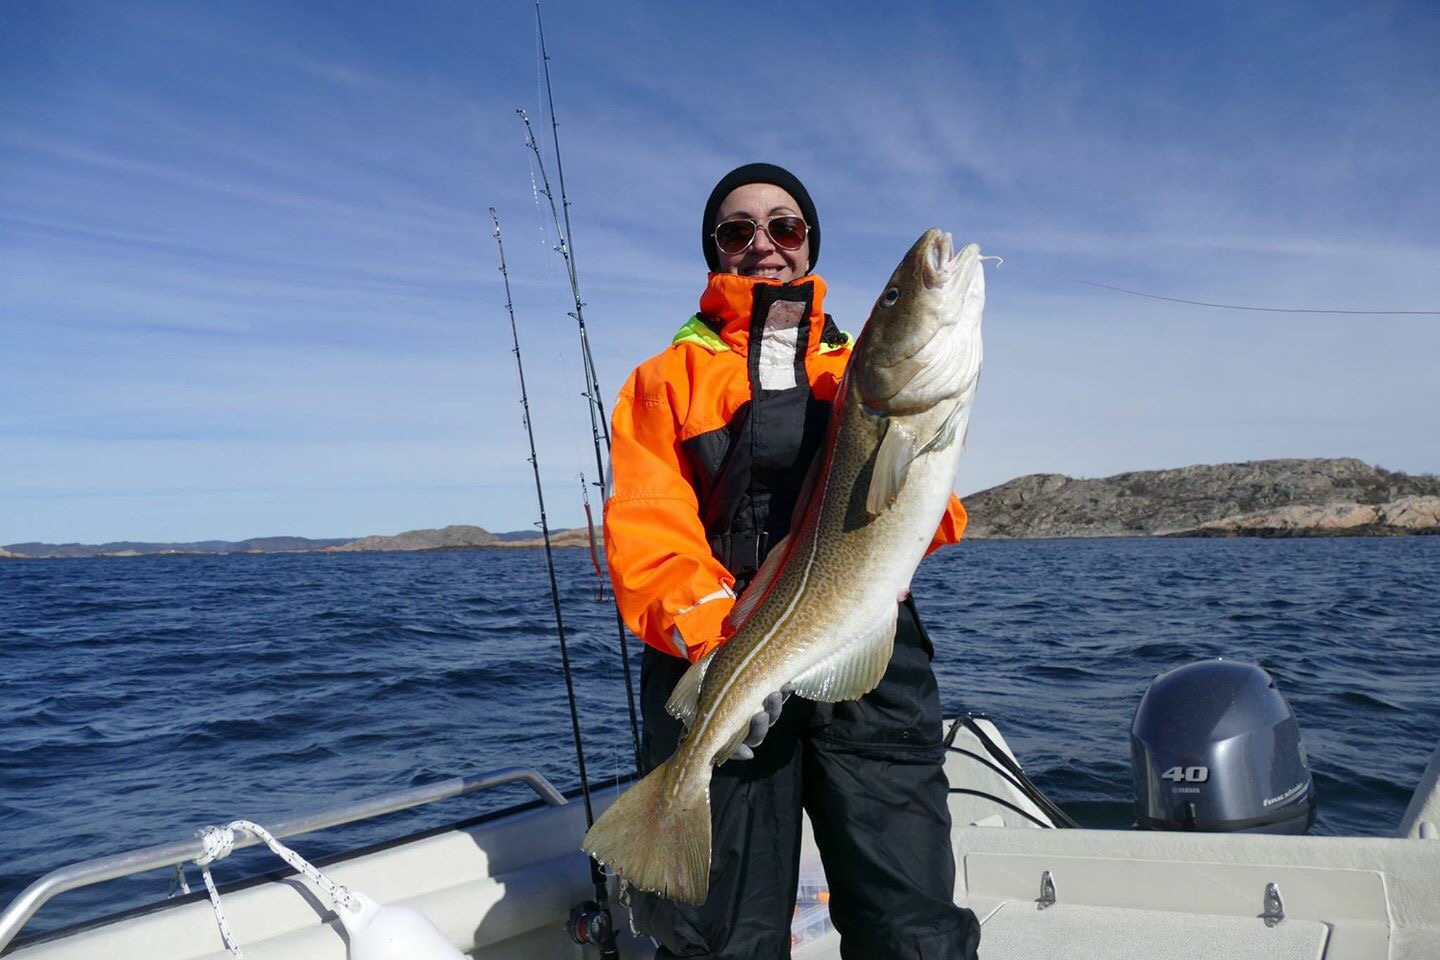 a man in orange is holding up a large fish